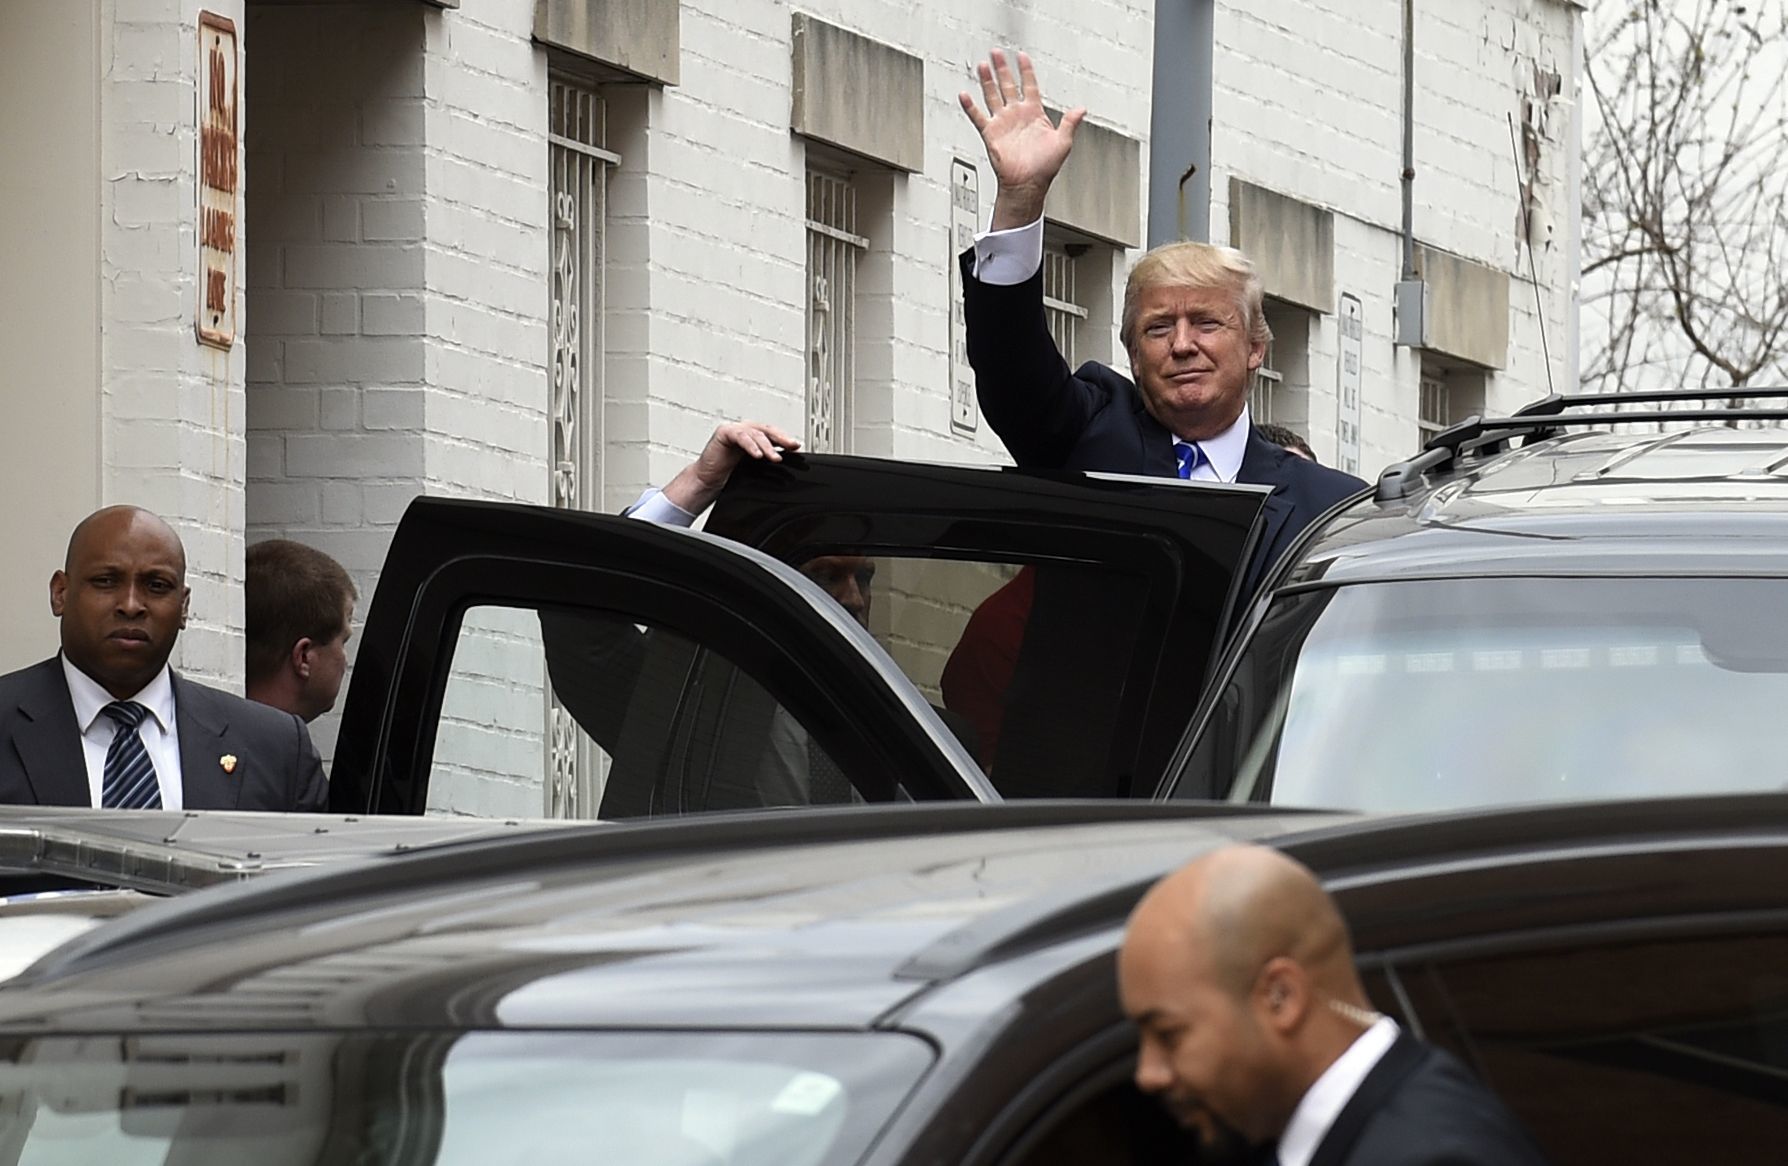 Republican presidential candidate Donald Trump gets into his vehicle in Washington on Thursday after a meeting with the Republican National Committee.